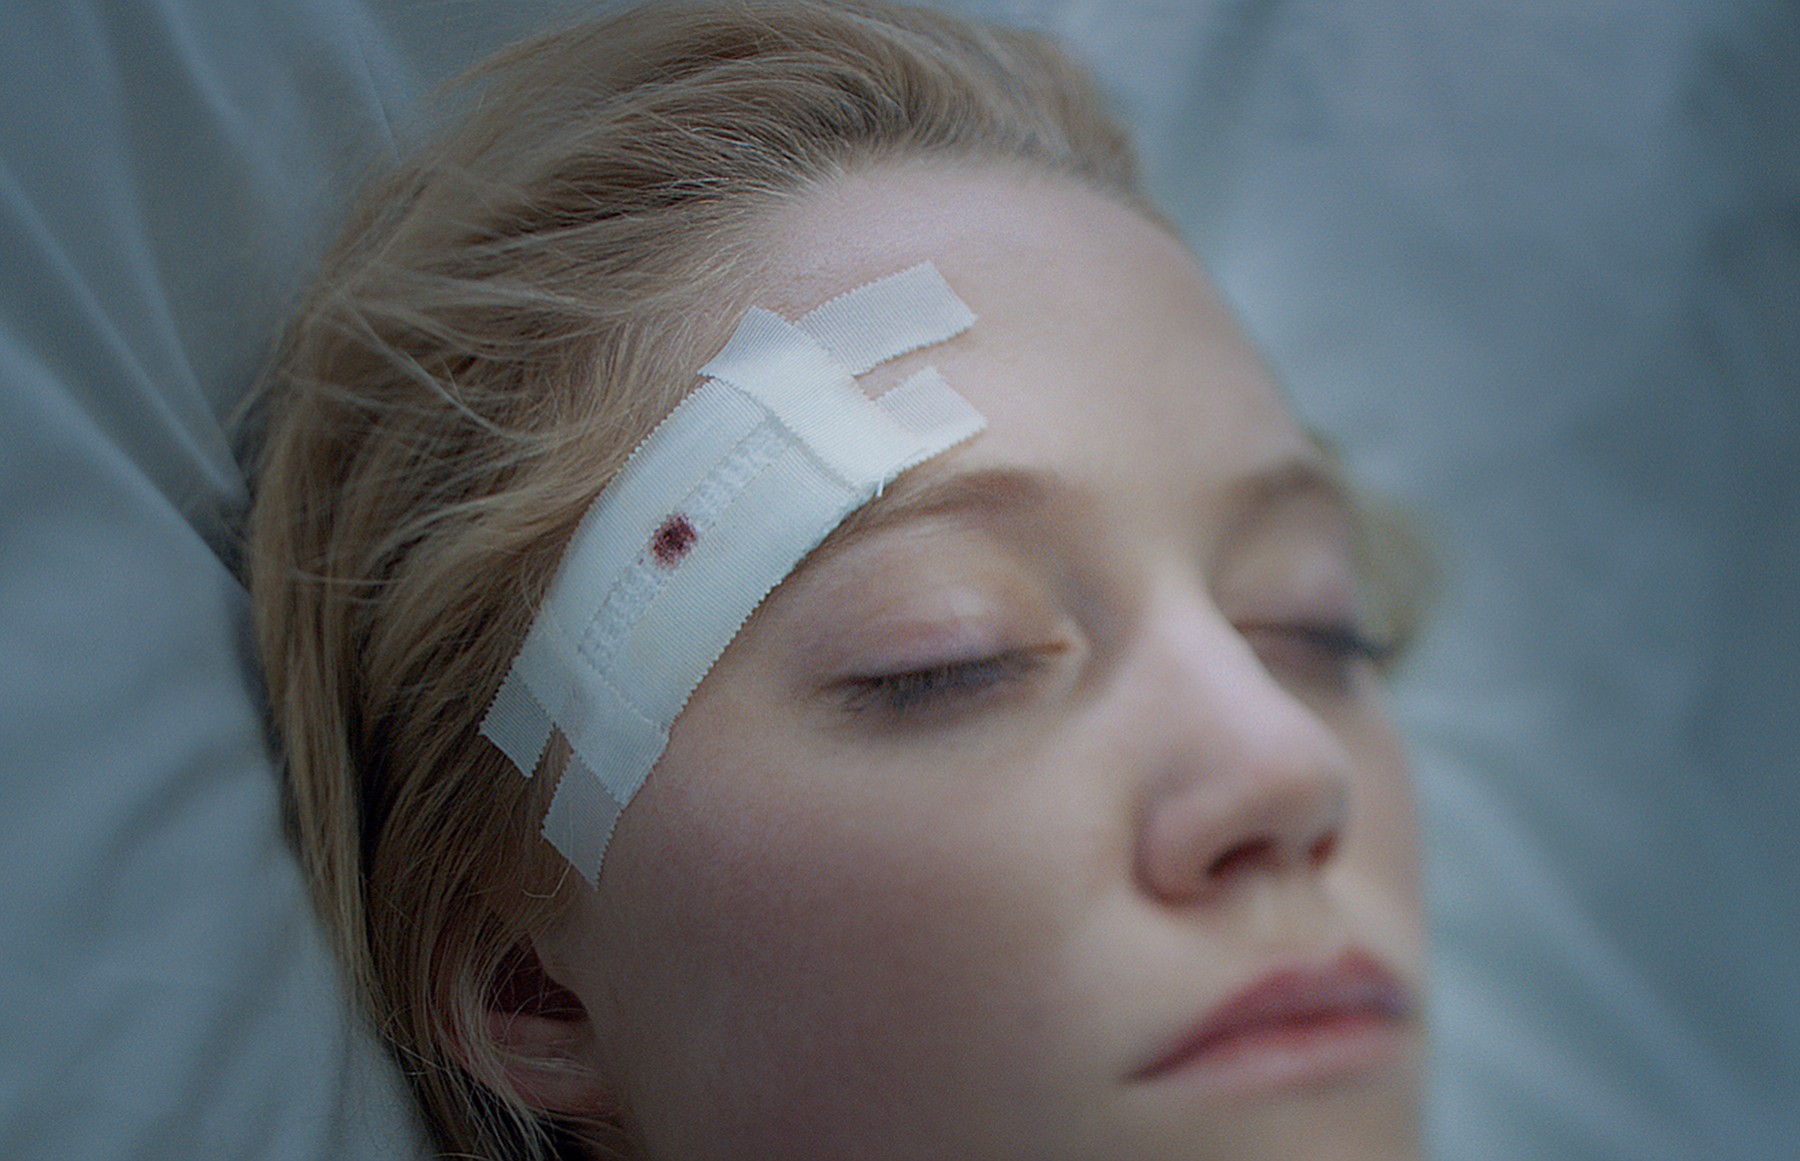 RADiUS
Maika Monroe is Jay, a teenage girl being stalked by a relentless supernatural pursuer, in &quot;It Follows.&quot;